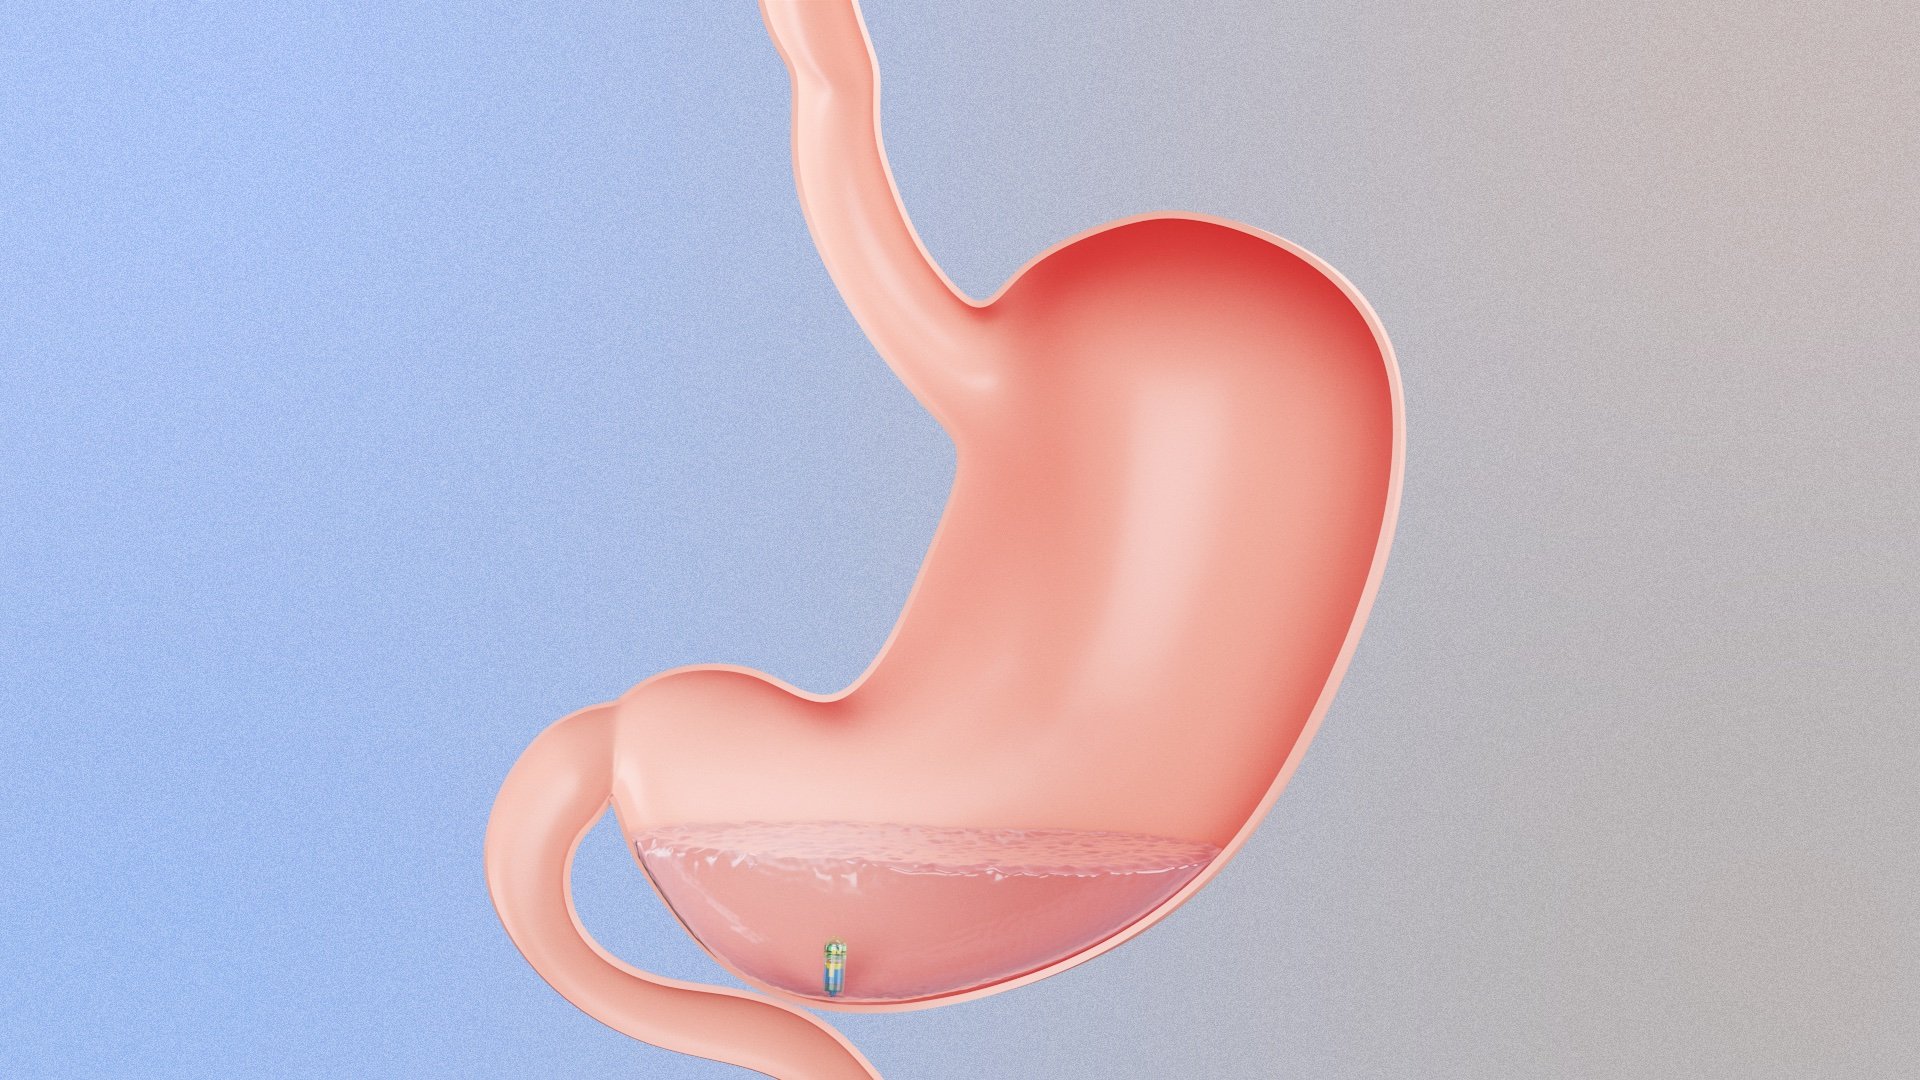 Once ingested, InjectTab positions itself against the stomach to prepare for an internal injection.